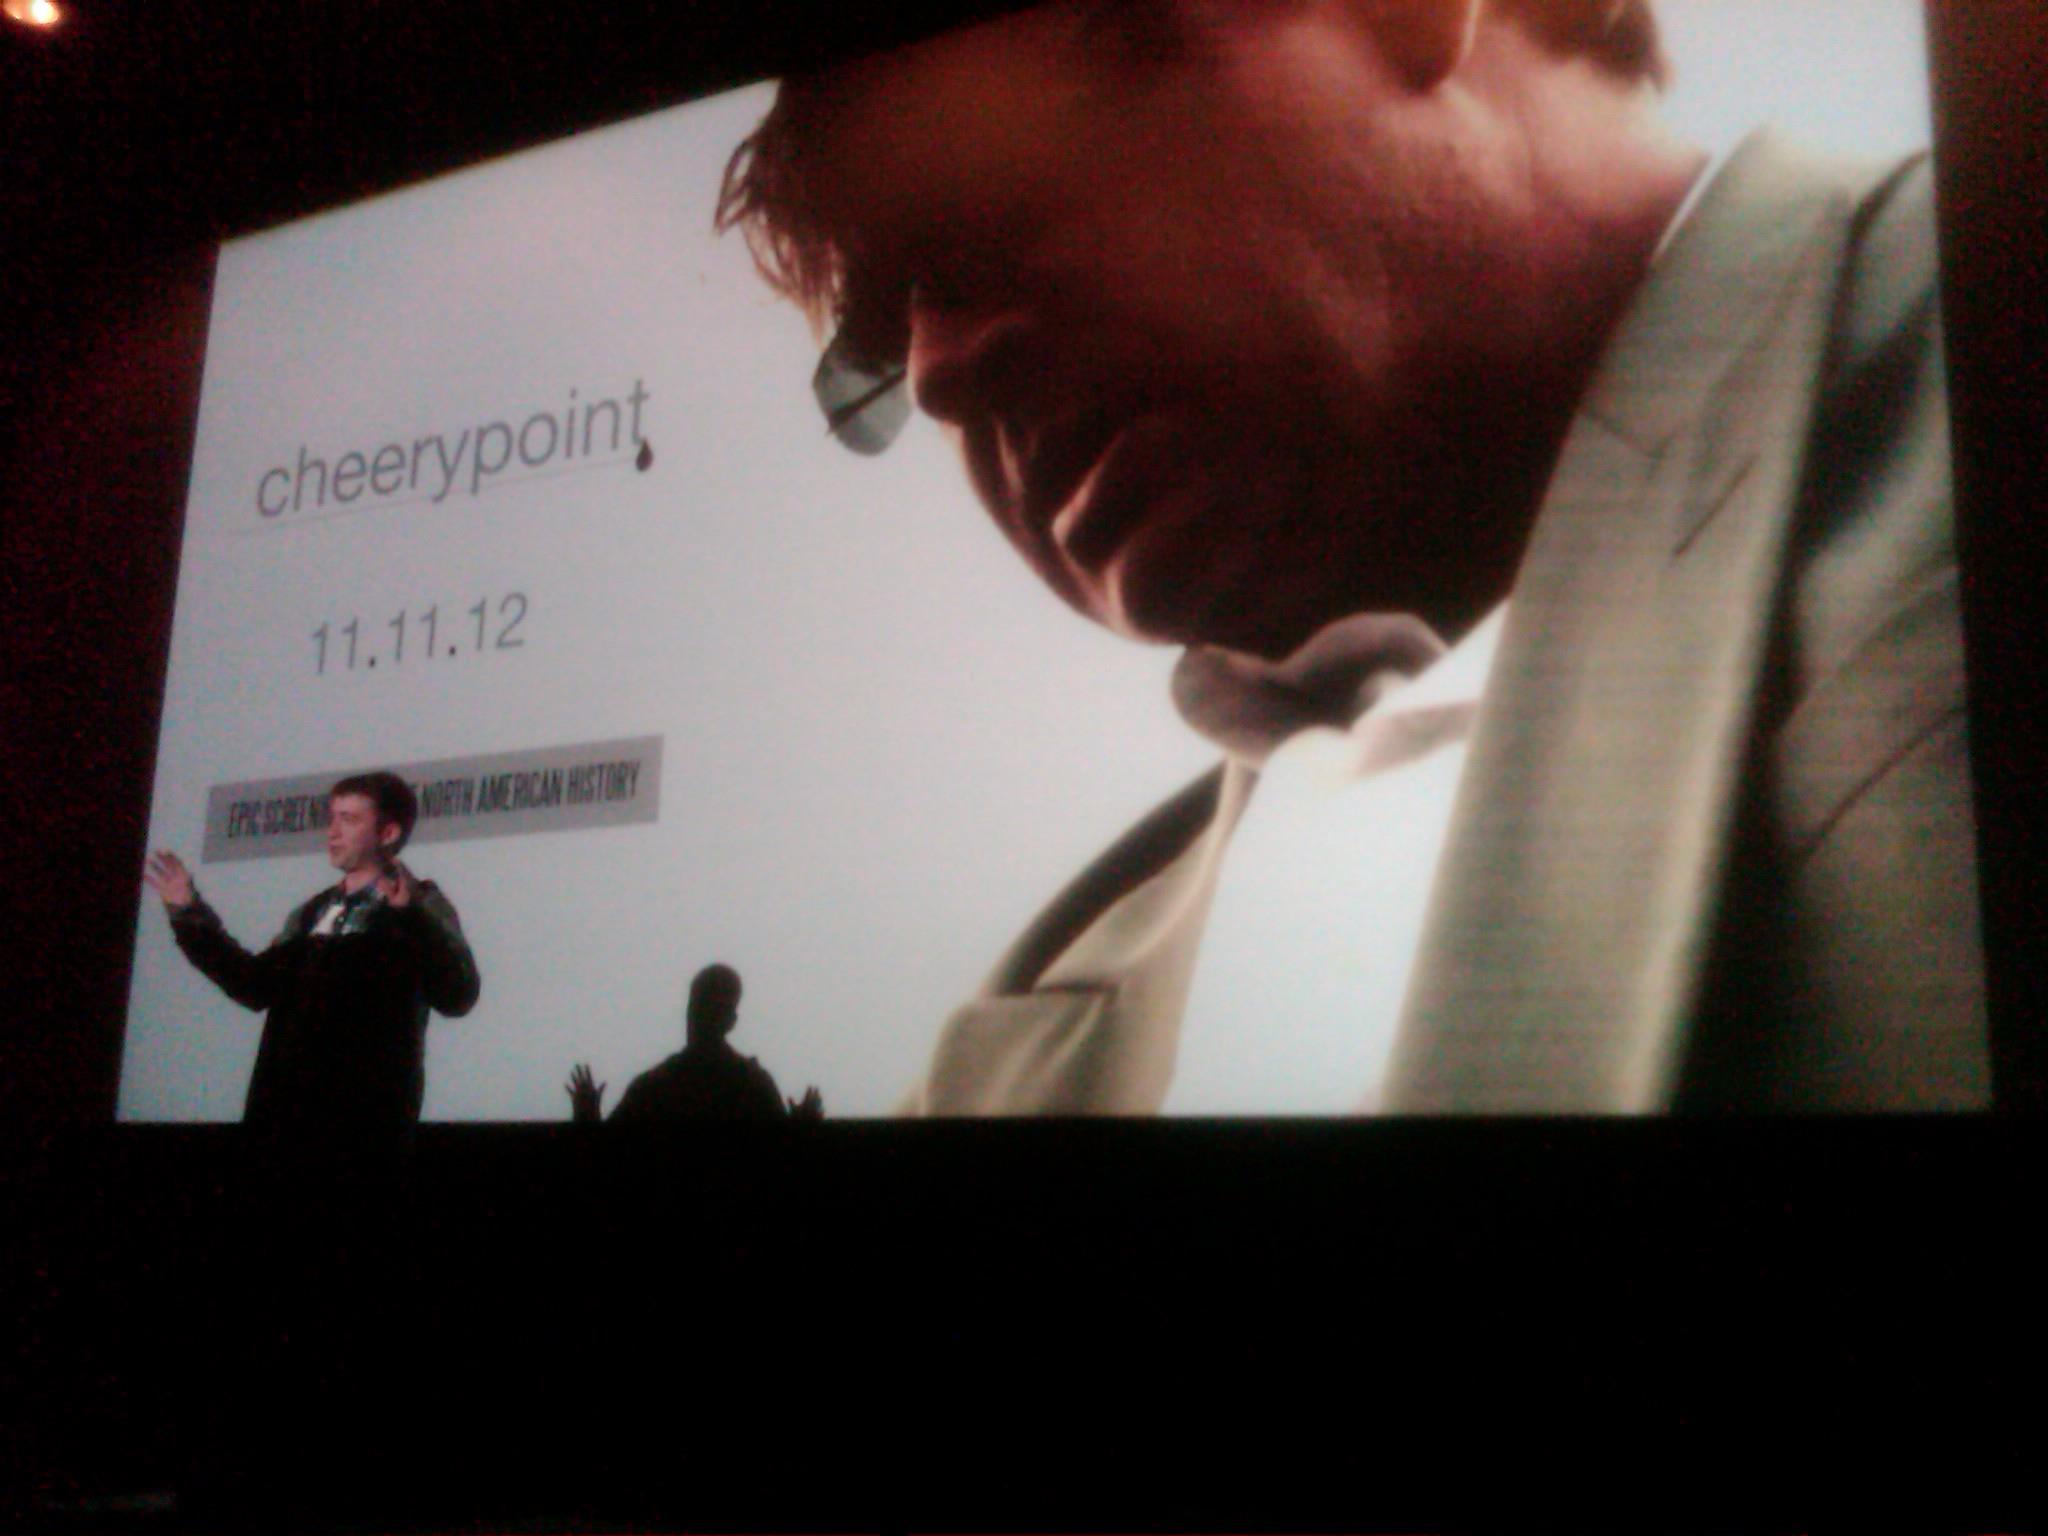 Giving a speech before a full audience in Baxter Avenue Theater at a screening of 'New World OrdeRx' (2013)